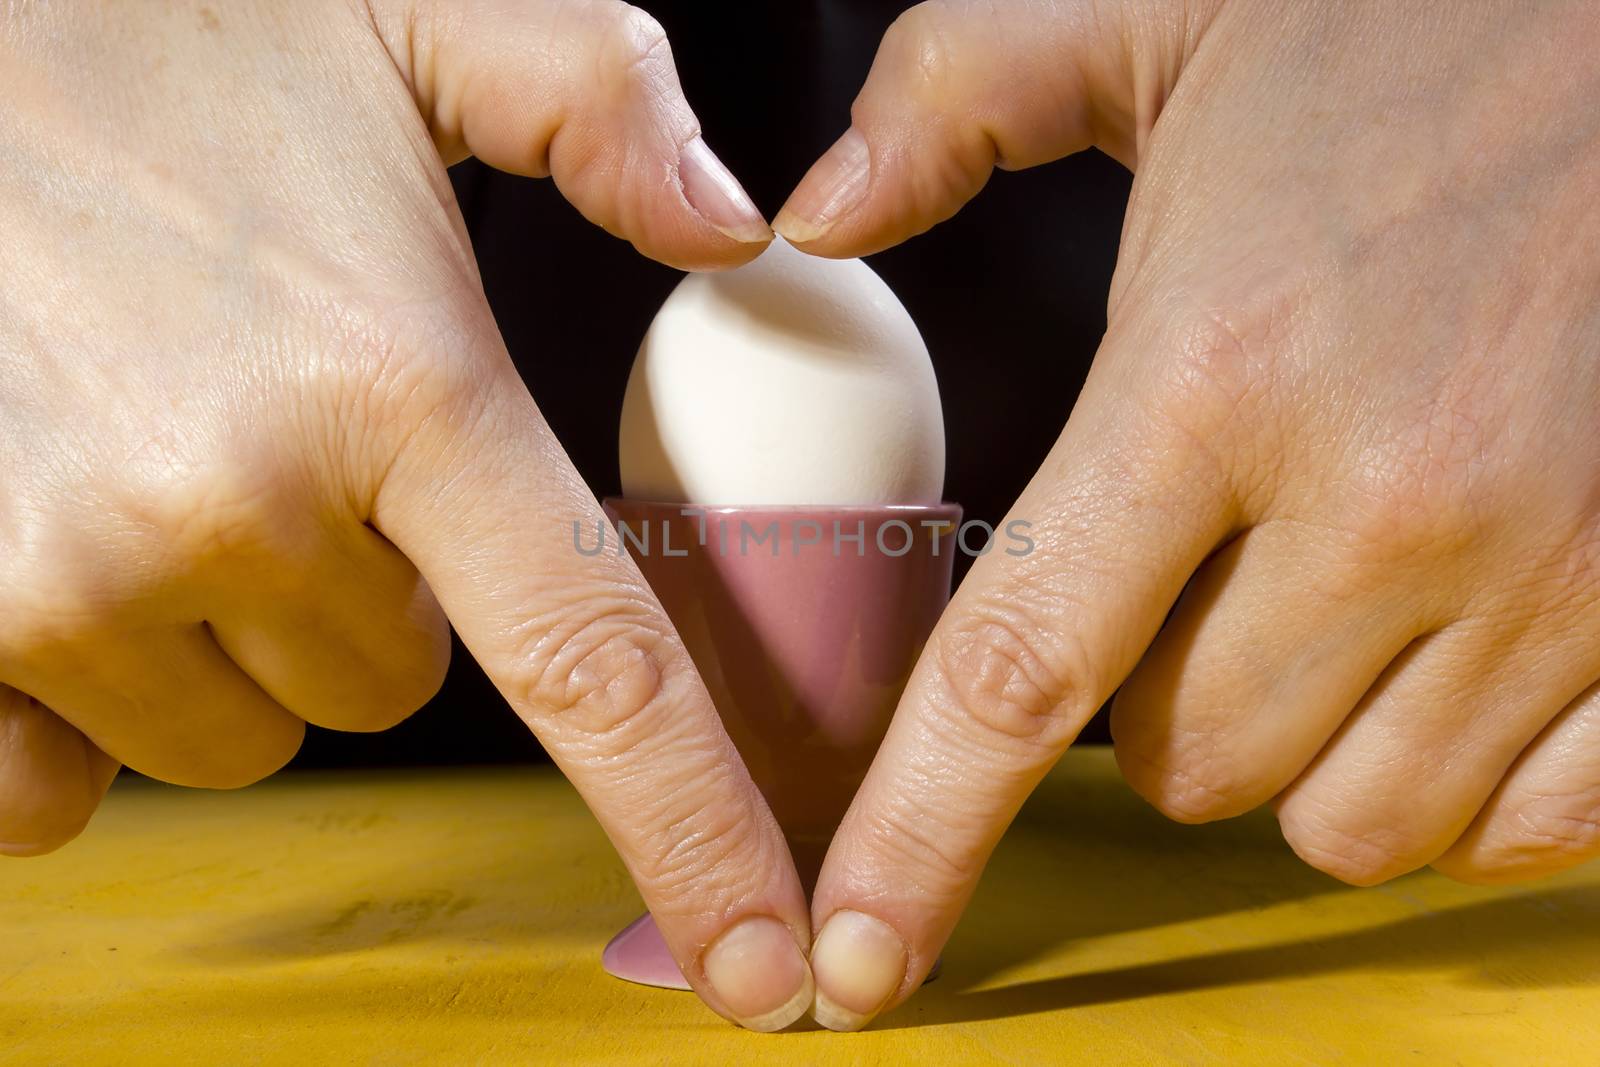 Boiled egg in the holder and the hands of the cook